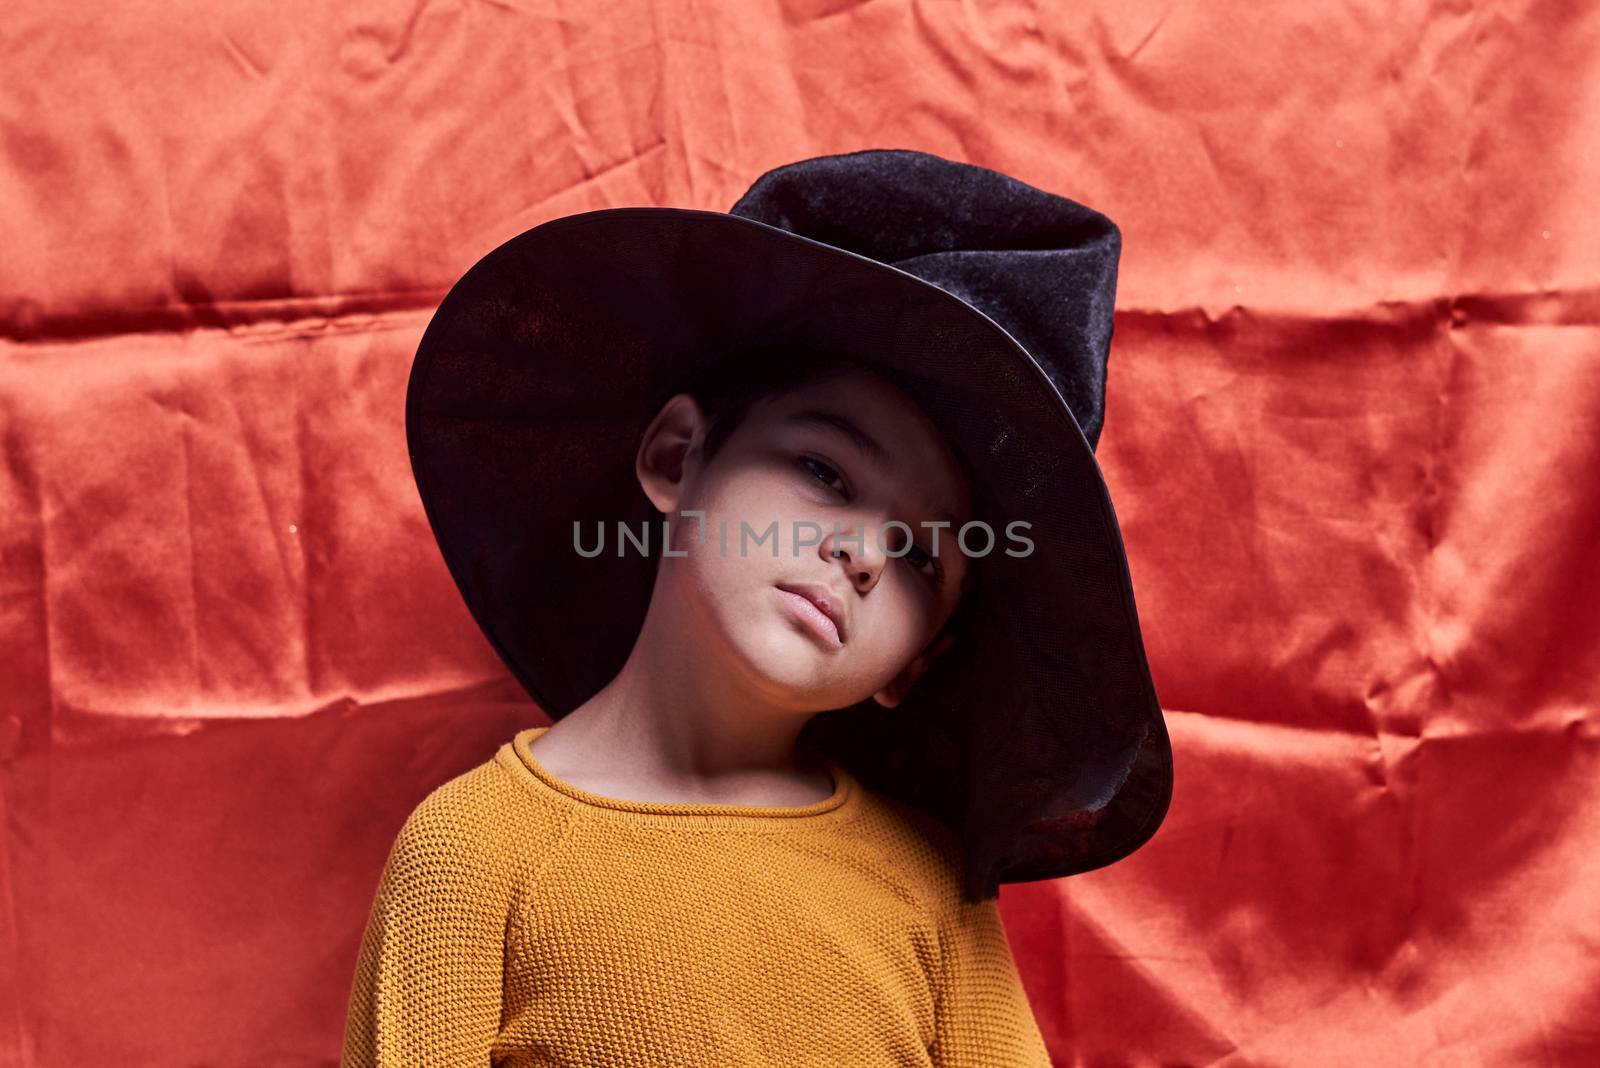 A young kid wearing witch hat by golibtolibov